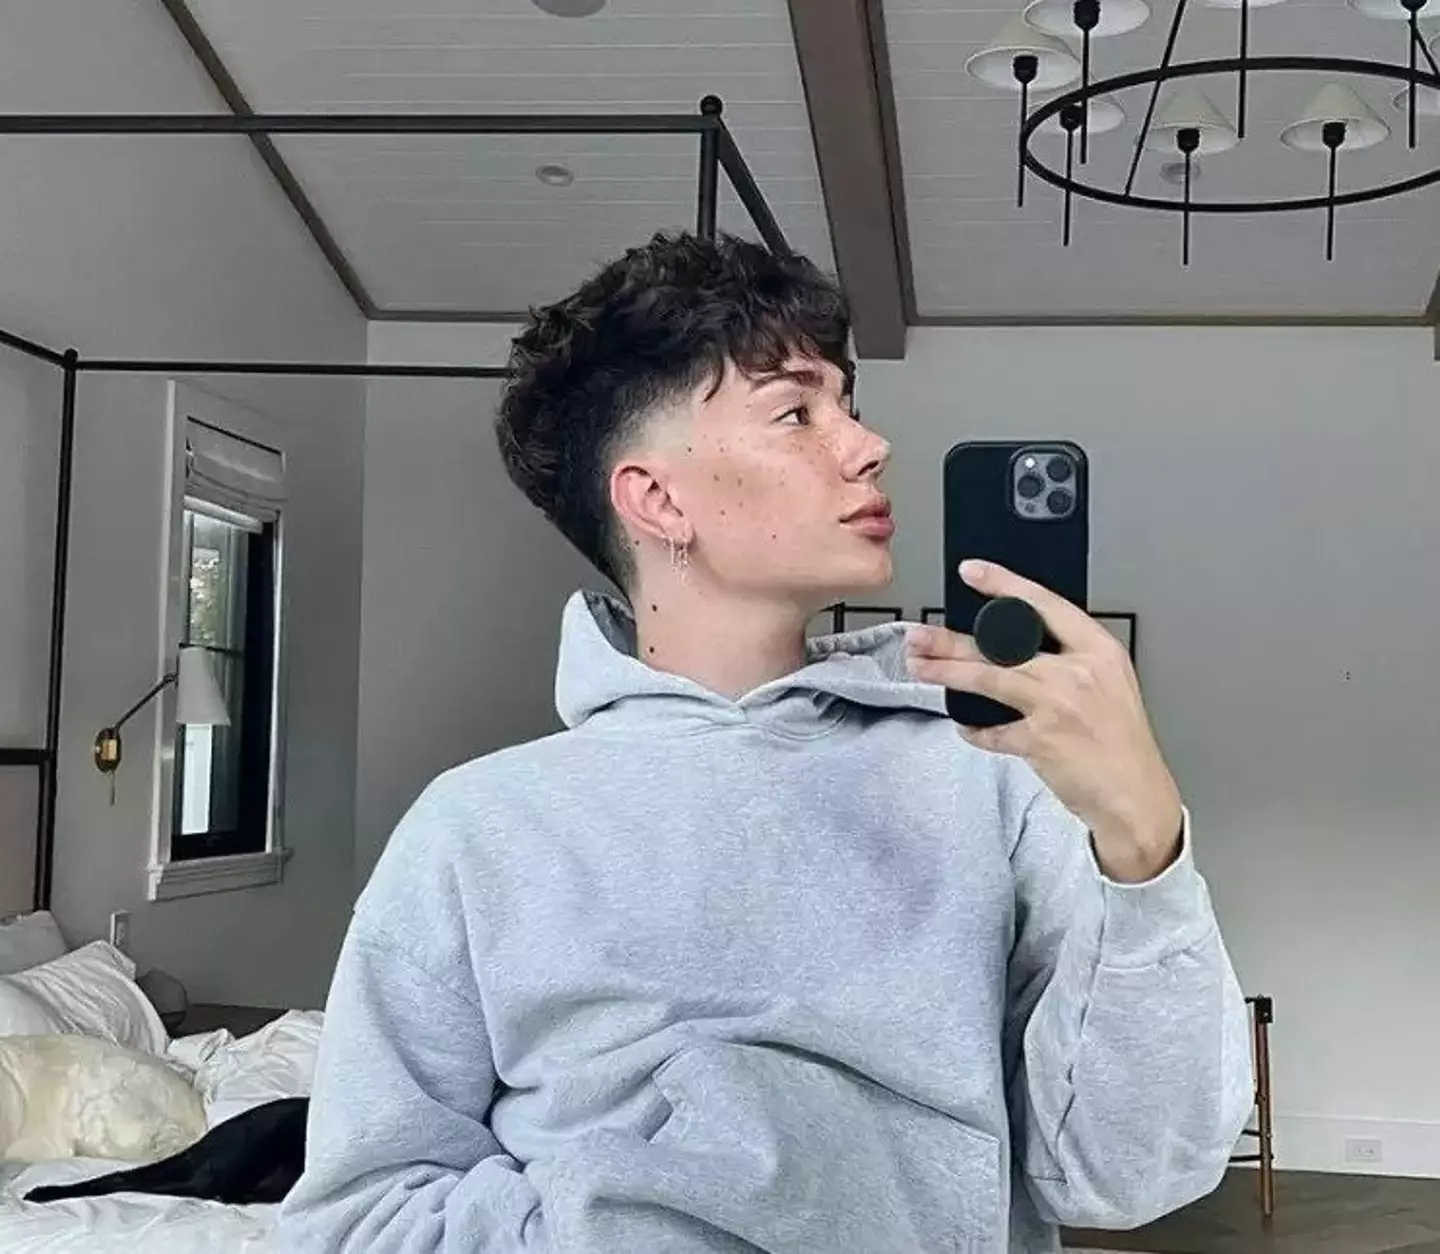 James Charles has been speaking about the allegations that were heaped on him.